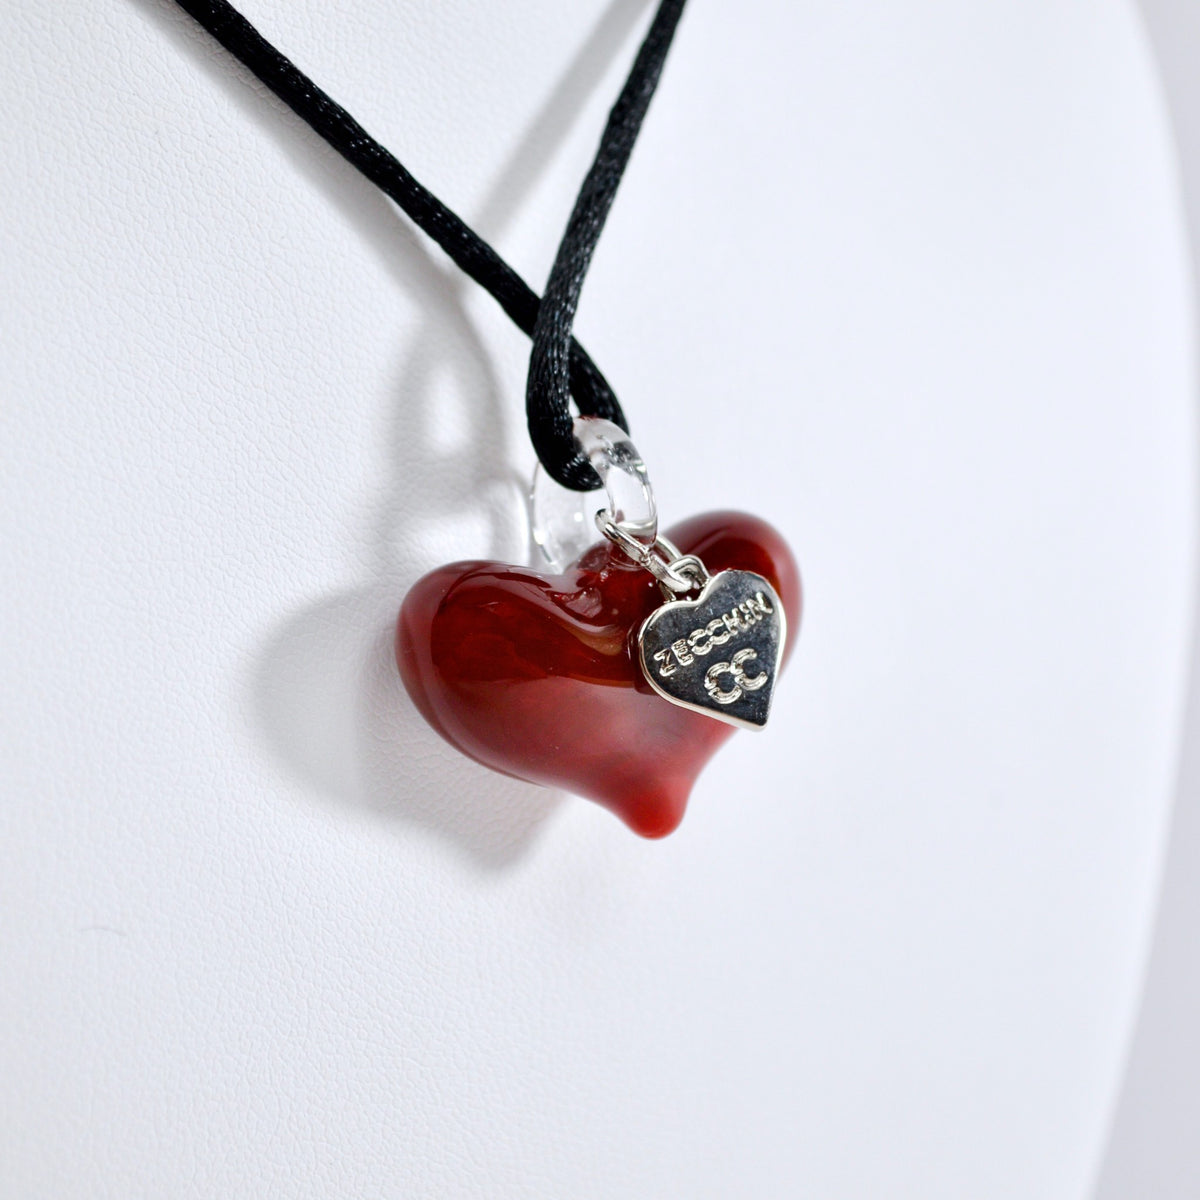 Murano Glass Mini Heart Pendant Necklace, Small or Large, Made in Italy - My Italian Decor